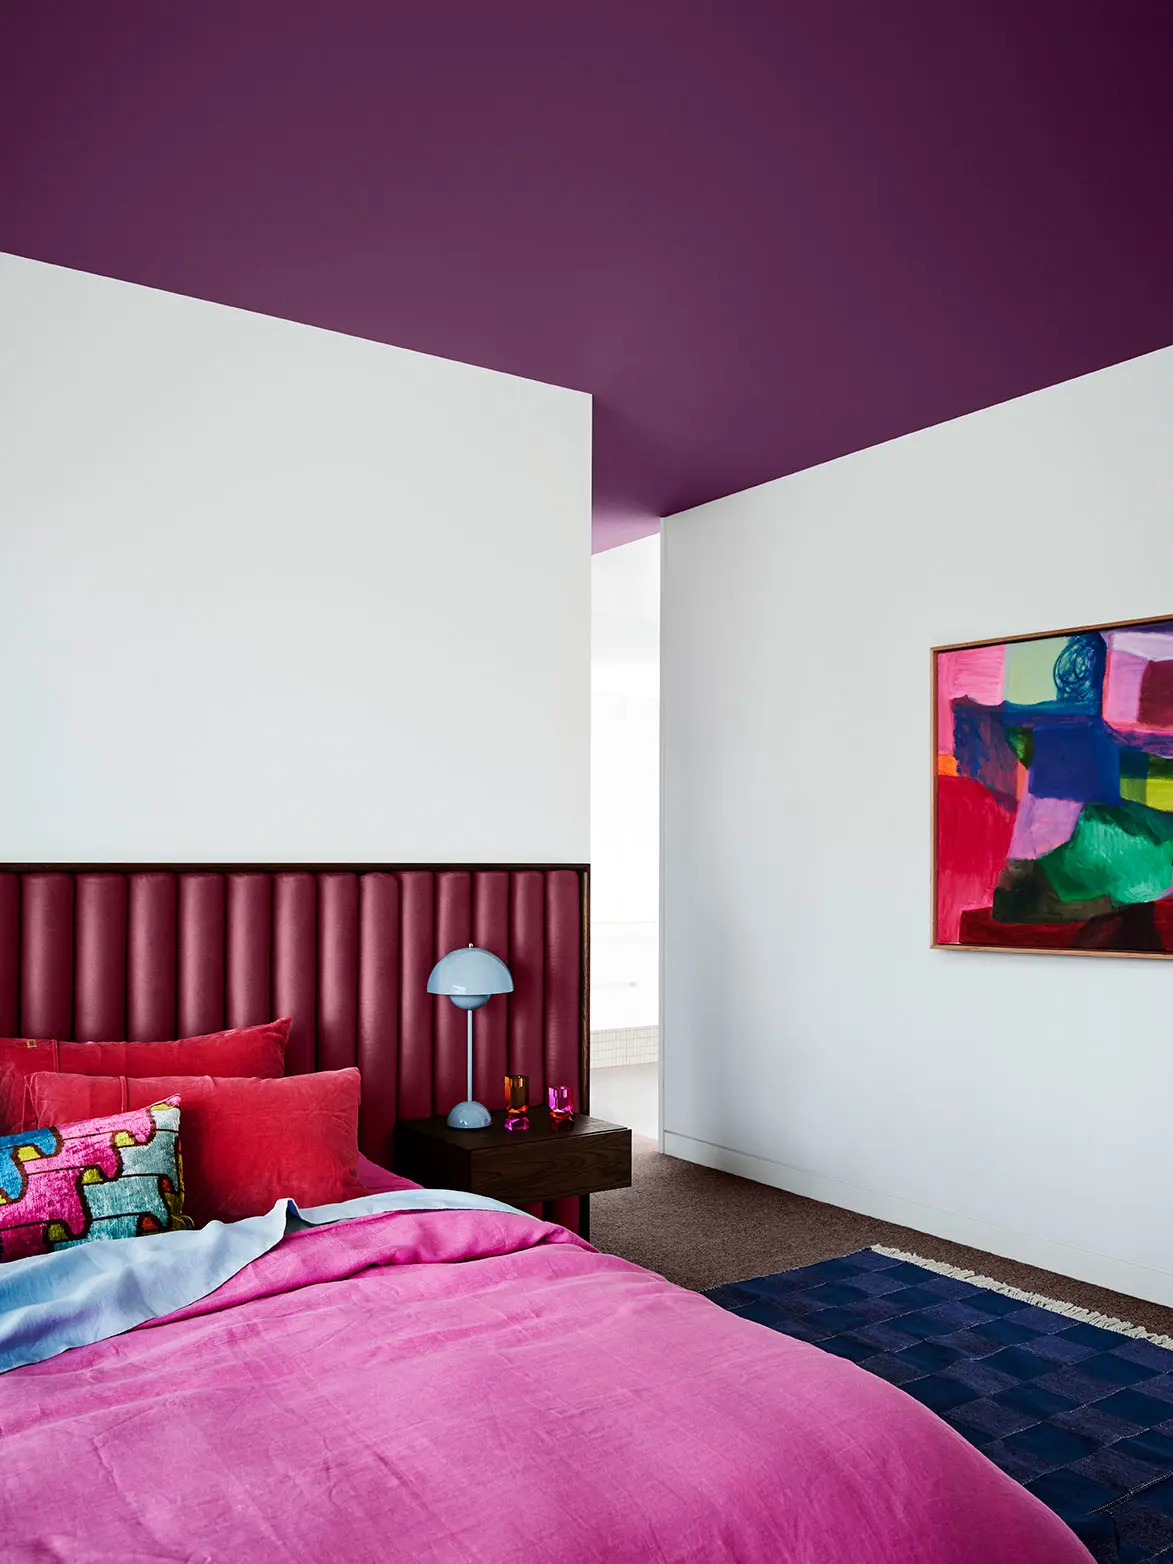 Bedroom with purple bedhead and ceiling and white walls